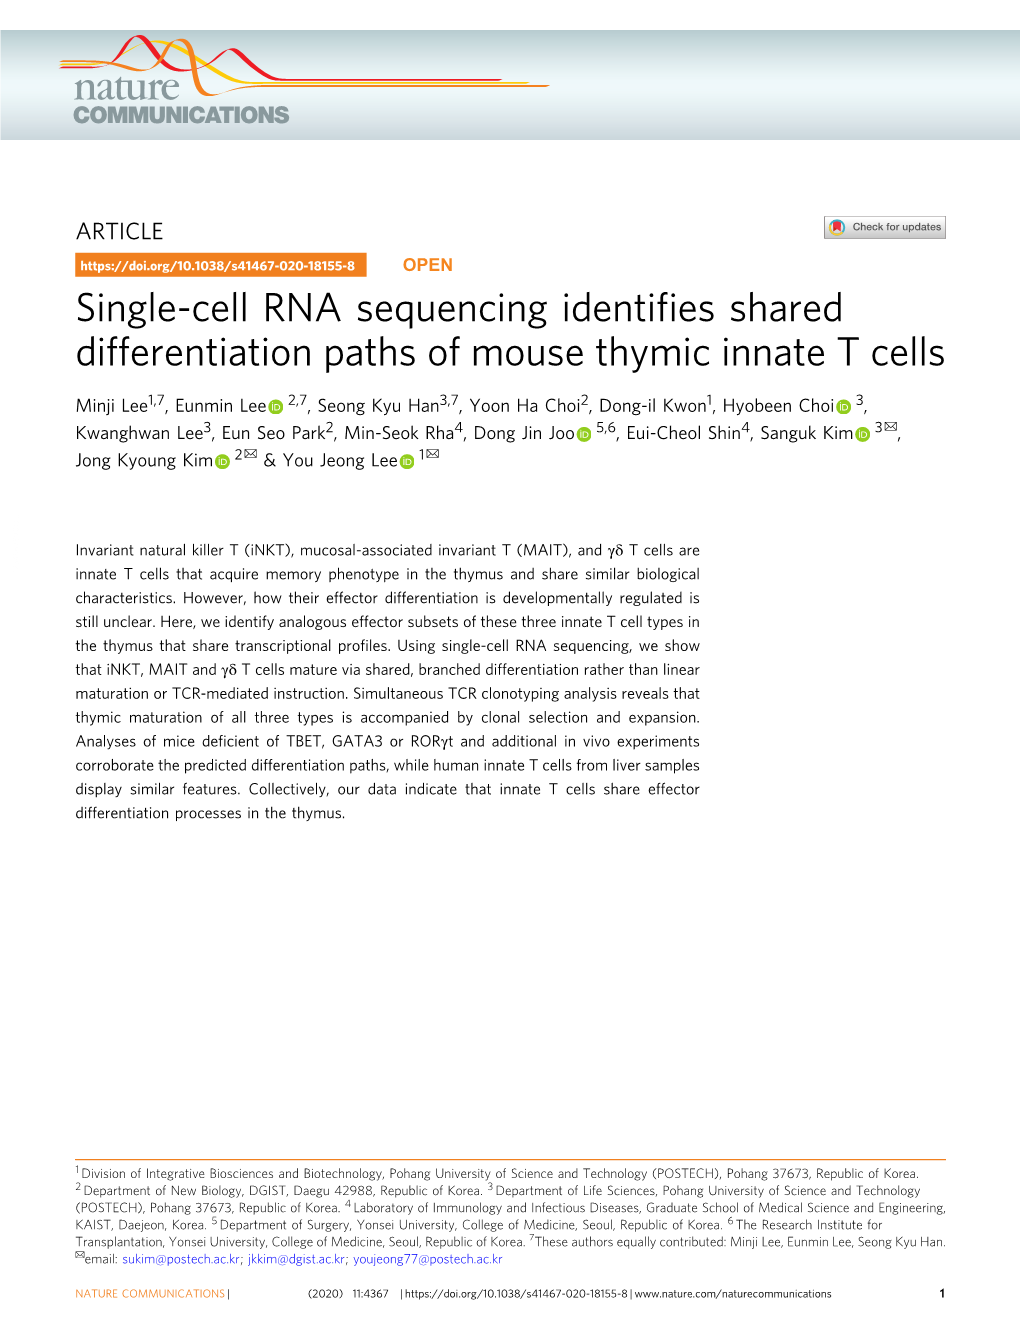 Single-Cell RNA Sequencing Identifies Shared Differentiation Paths